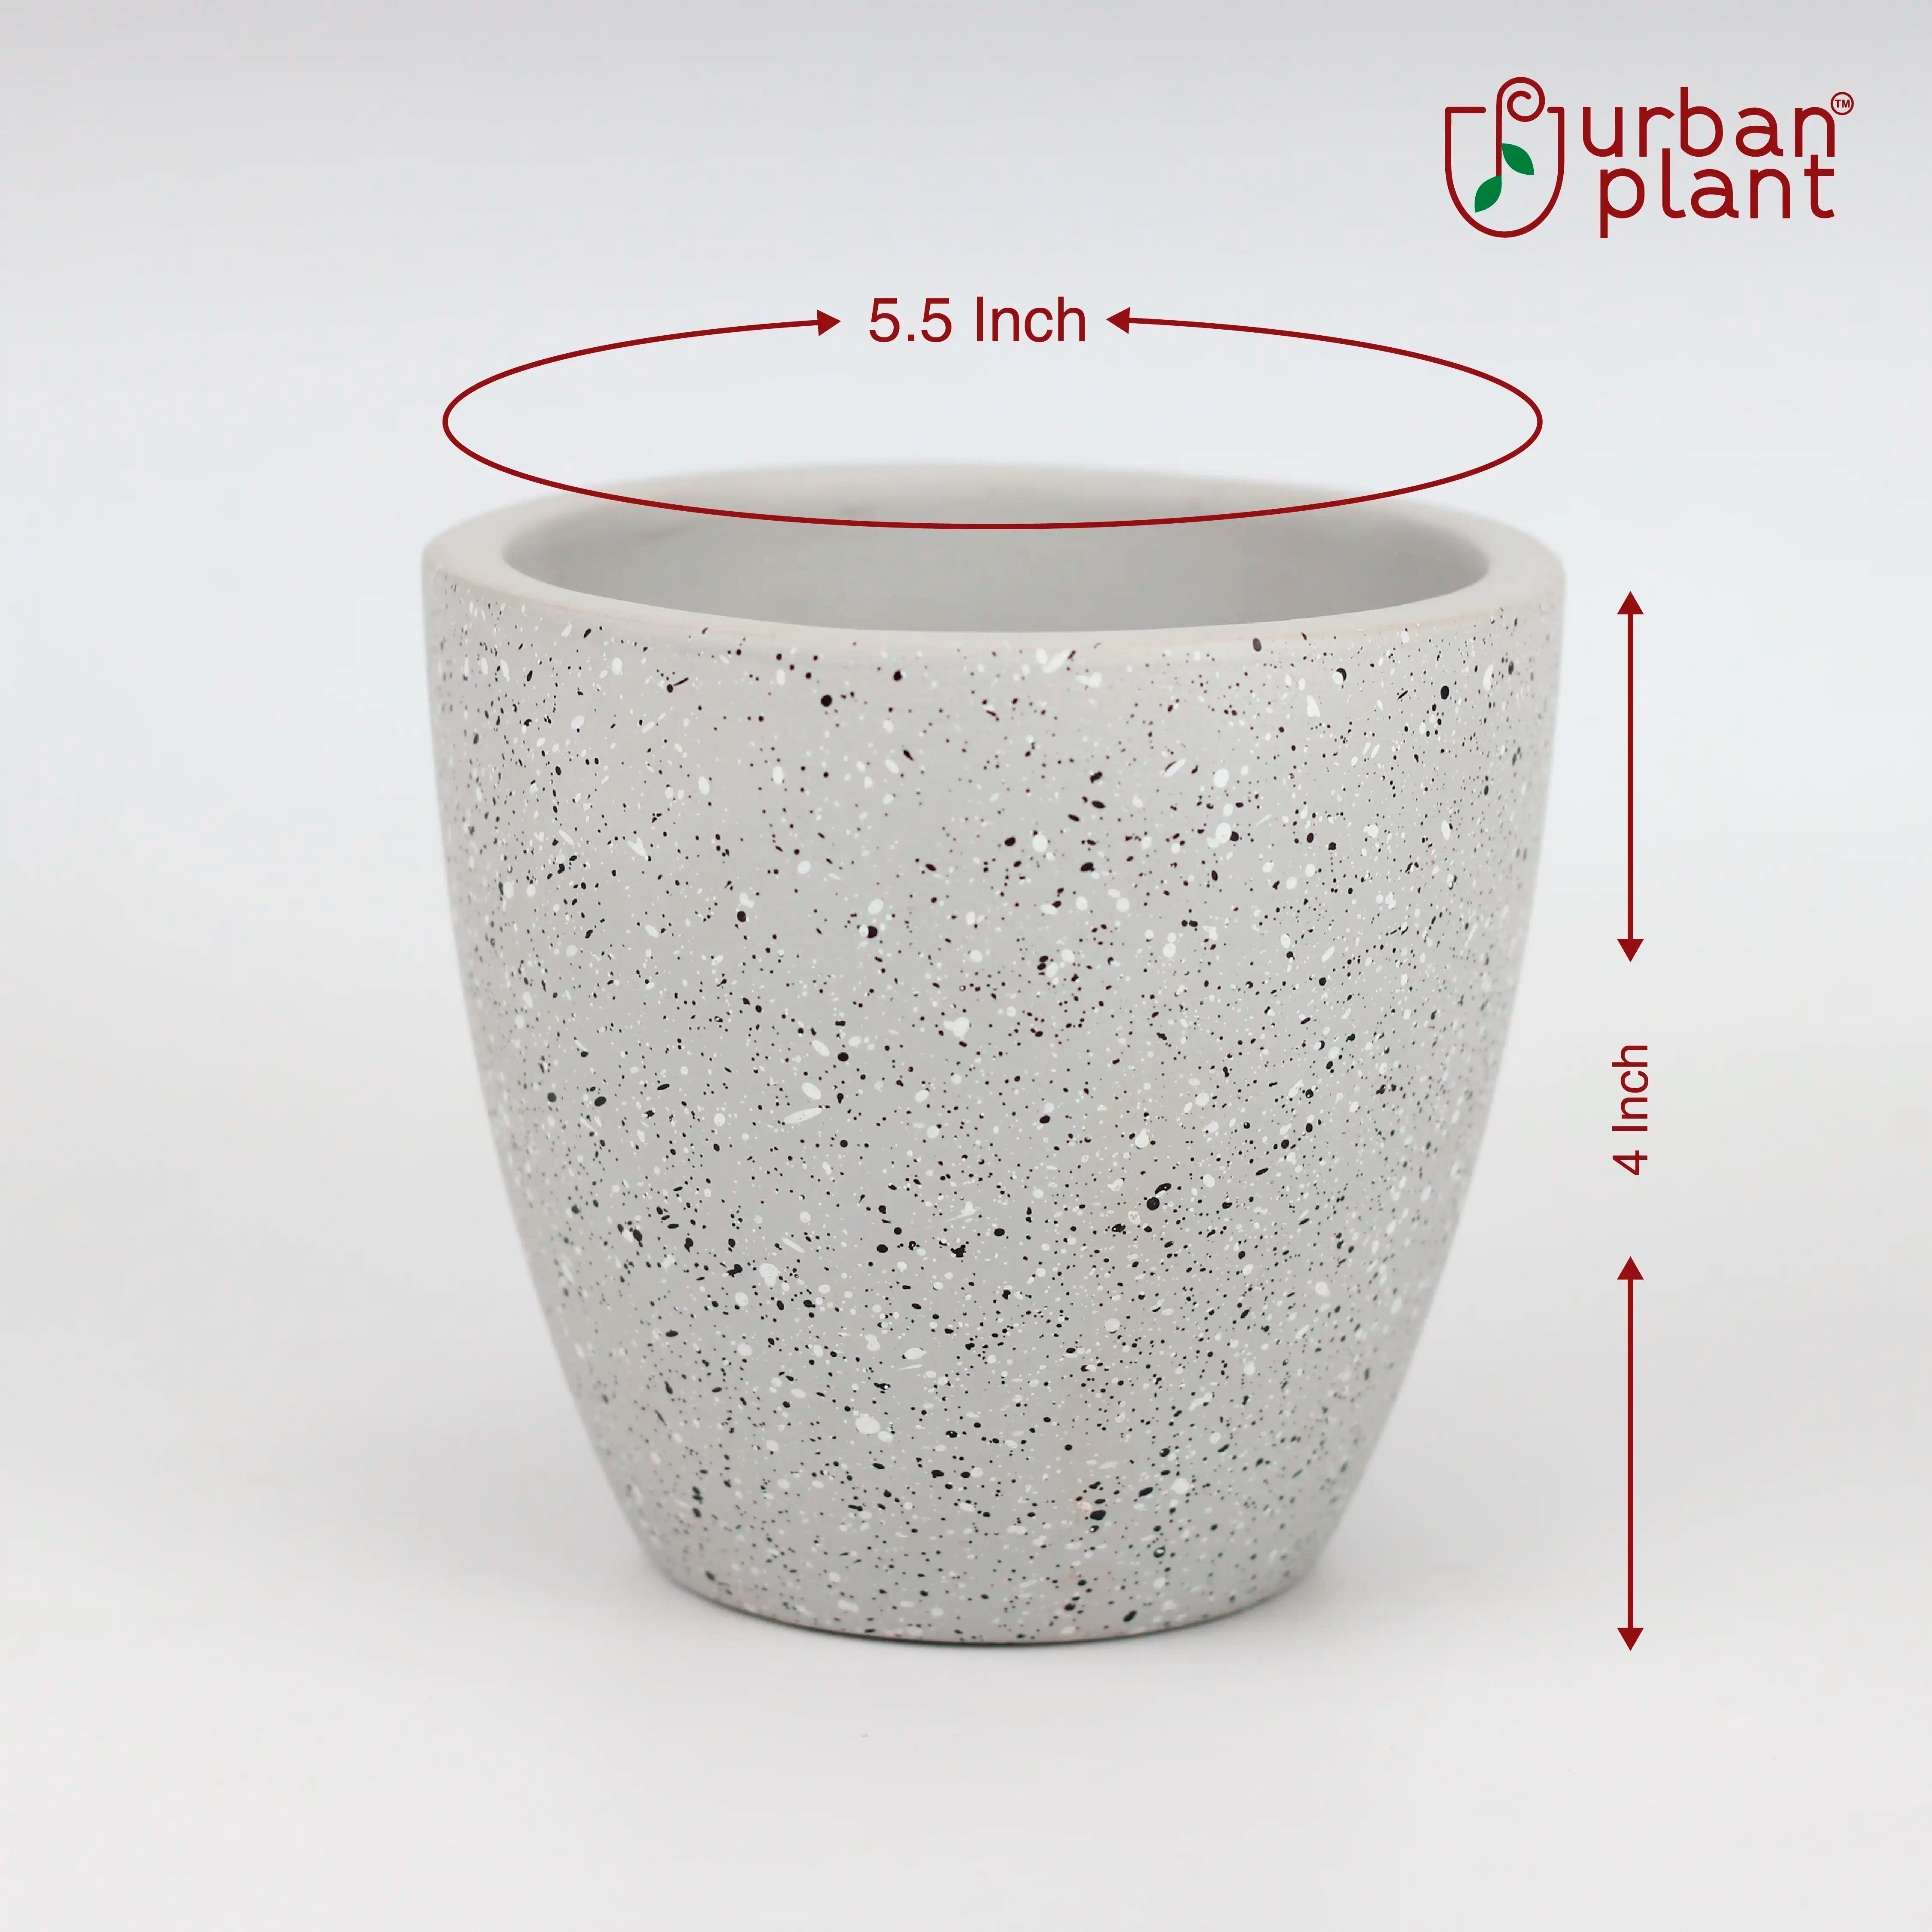 Terrazzo Terracotta Pot with FREE Wooden Saucer Urban Plant 